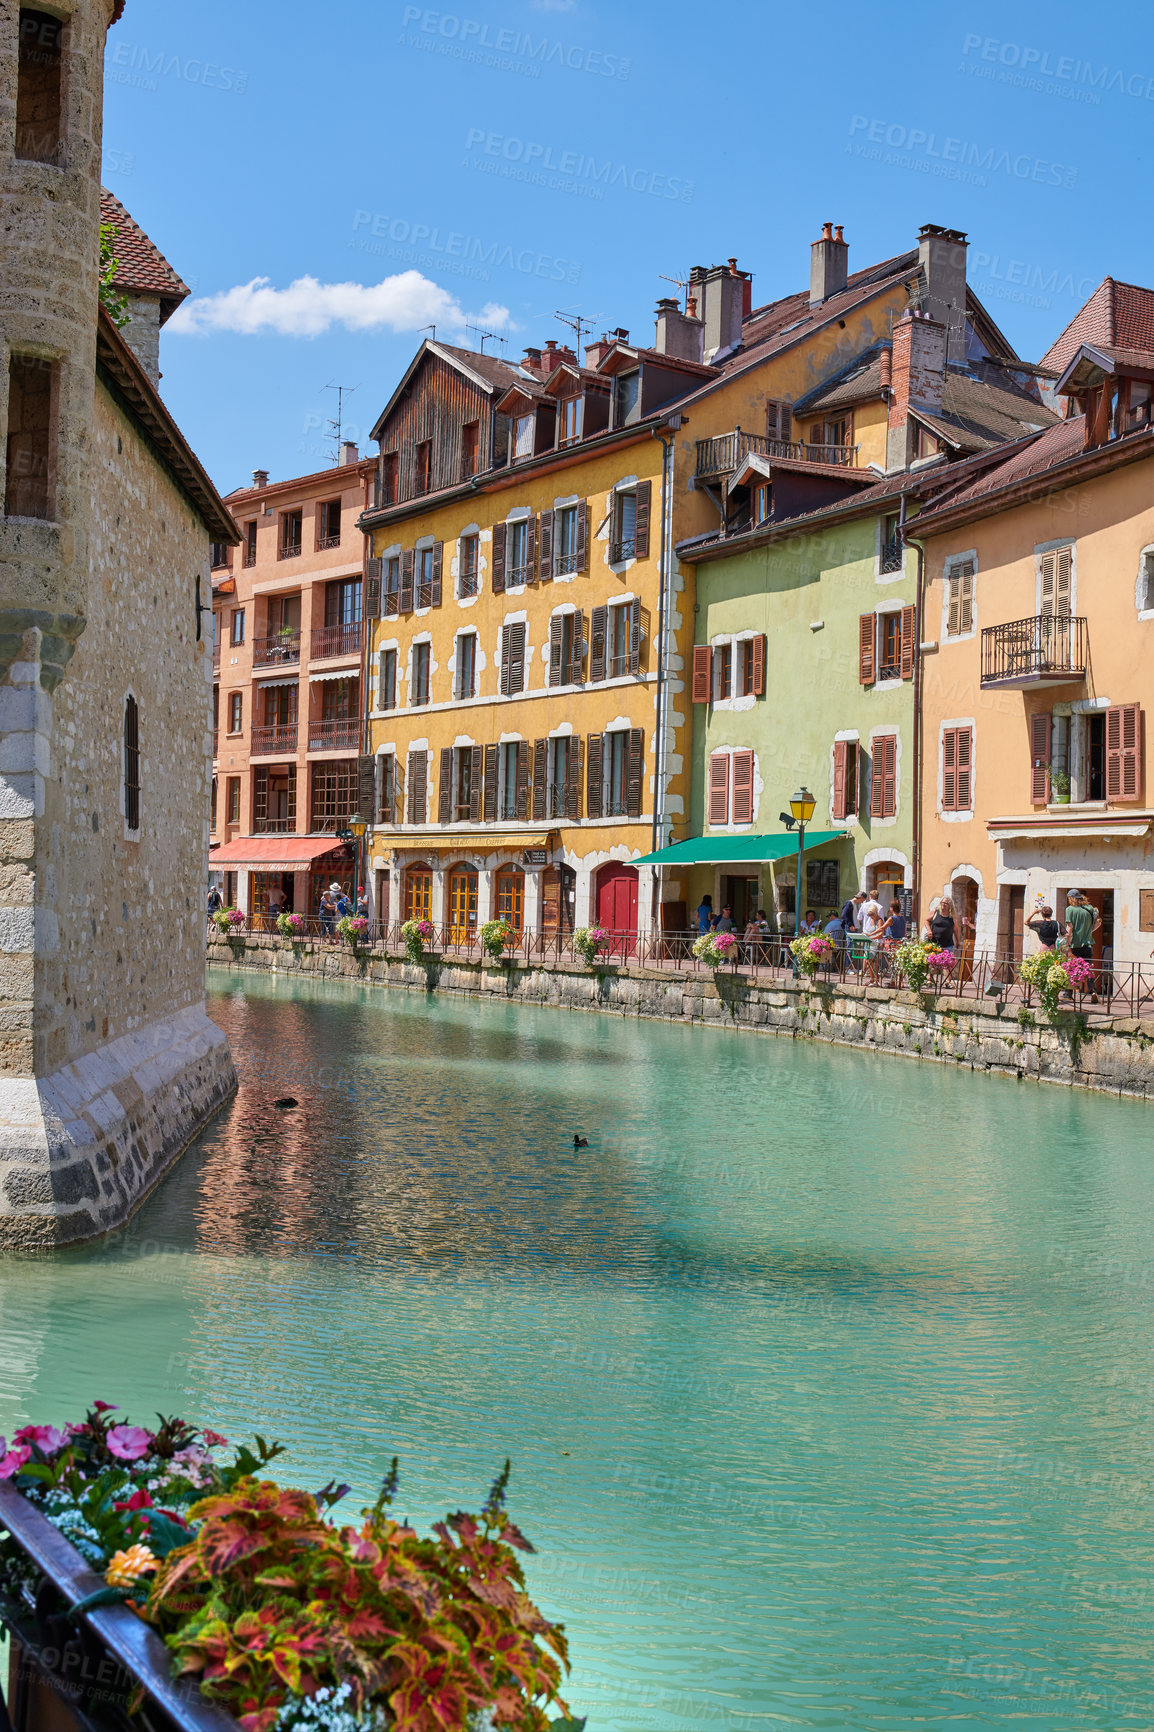 Buy stock photo Annecy, France, July, 17, 2019: Houses and street life in the famous medieval part of the city of Annecy, Department of Upper Savoy, France.Editorial: Annecy, France, July, 17, 2019: Houses and street life in the famous medieval part of the city of Annecy, Department of Upper Savoy, France.